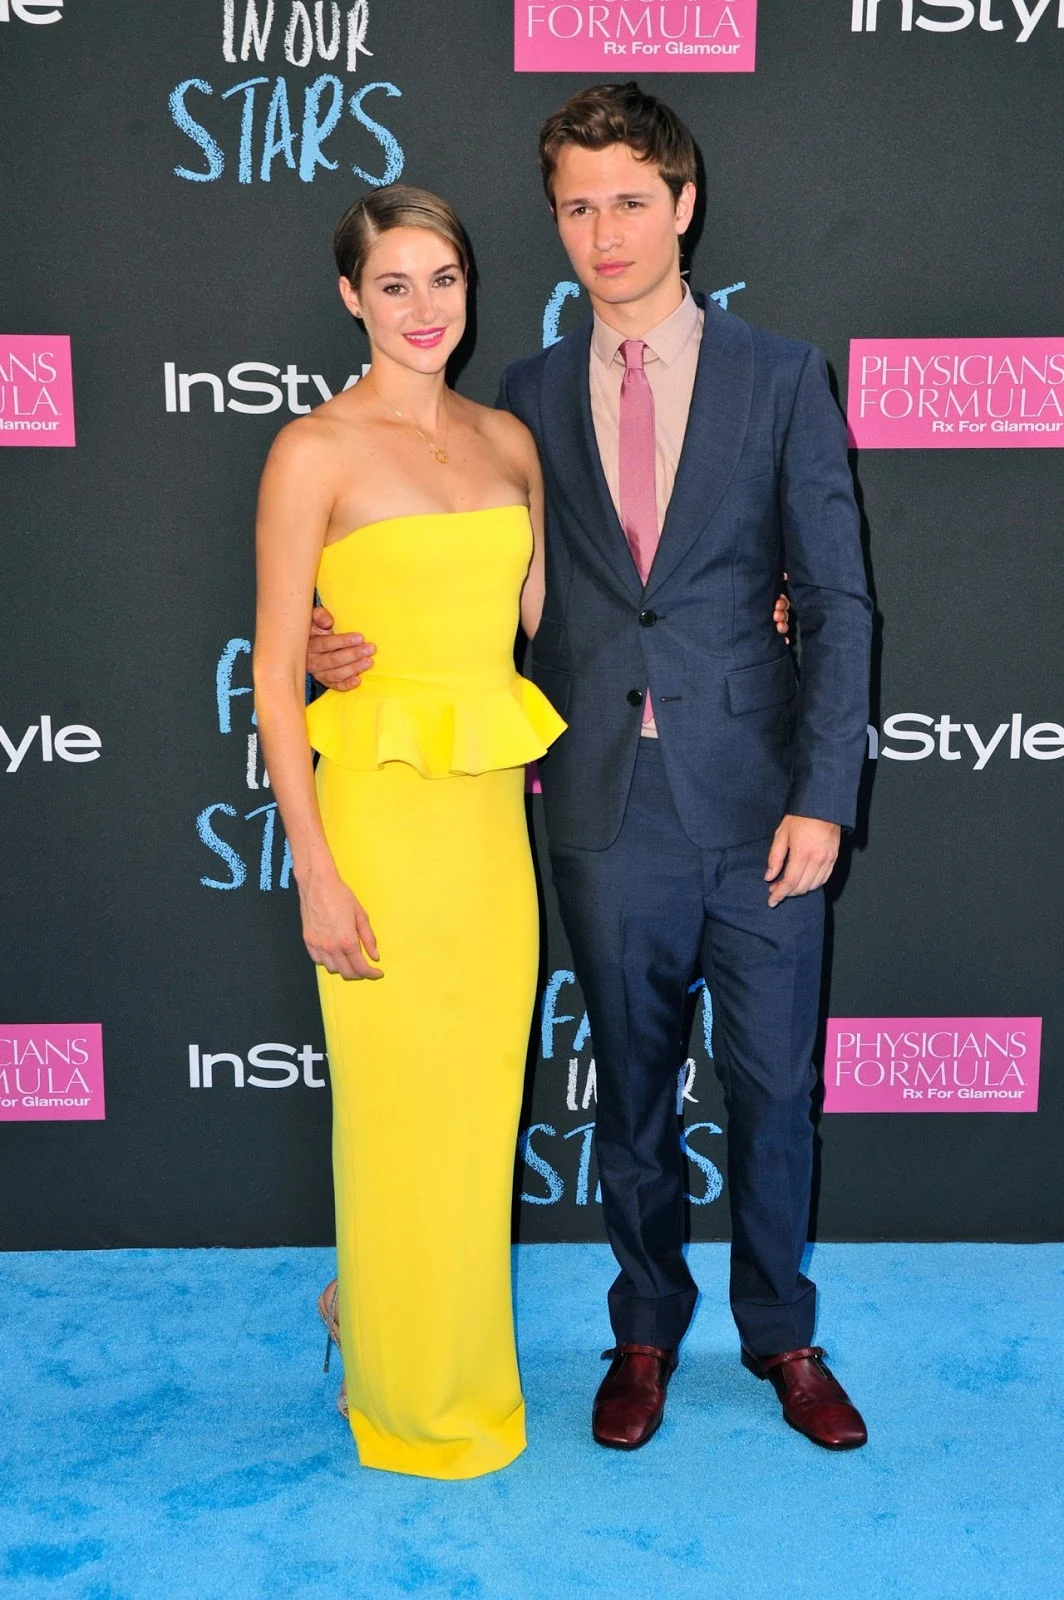 Shailene Woodley in a strapless Ralph Lauren dress at 'The Fault in Our Stars' NY Premiere